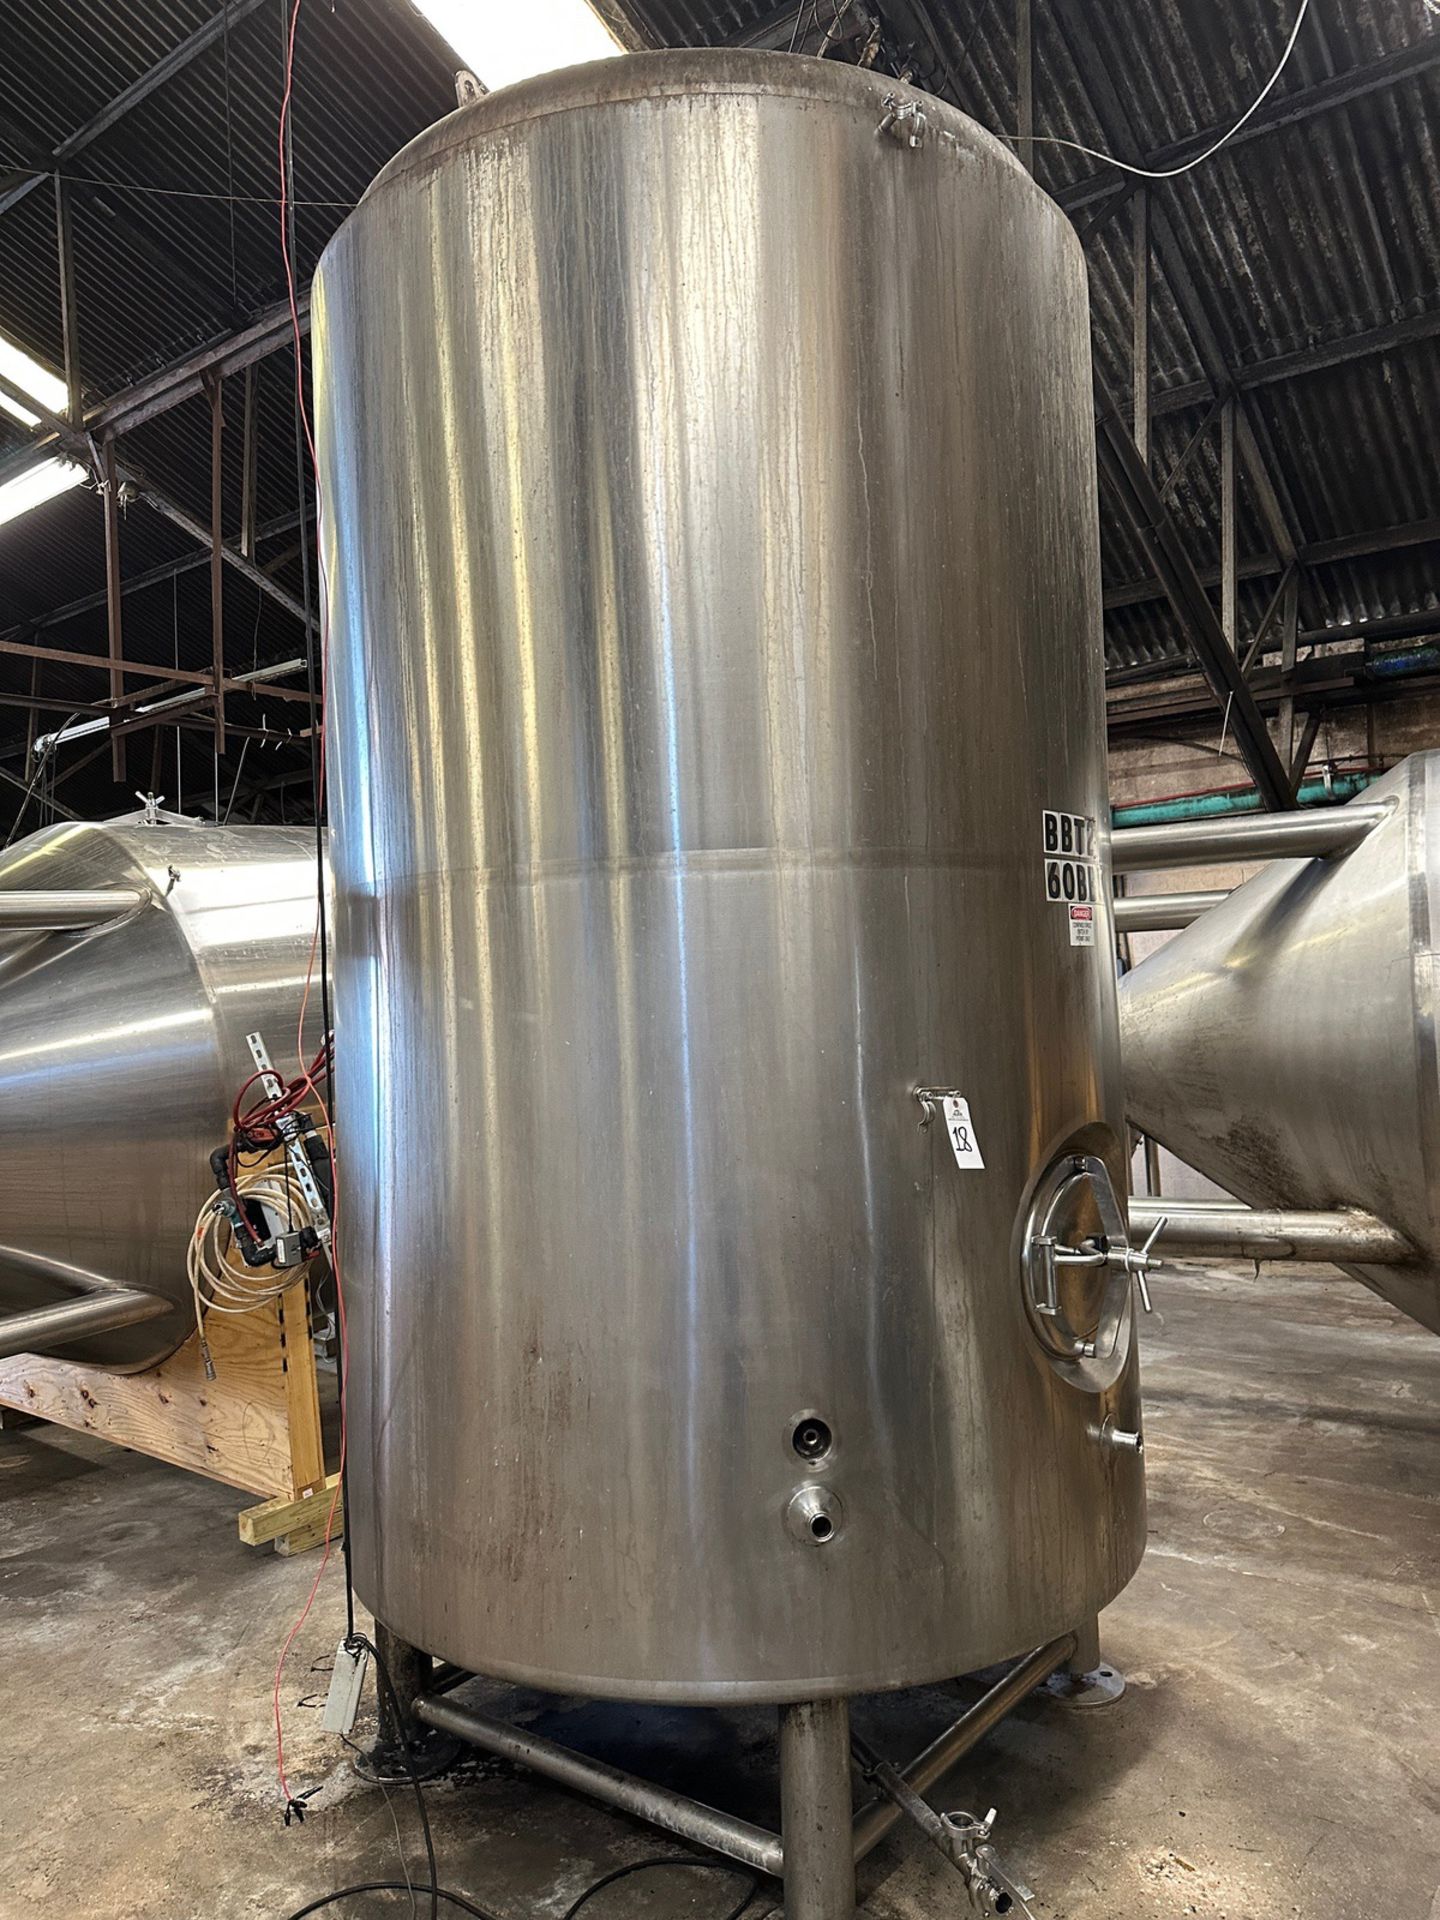 Premier Stainless 60 BBL Stainless Steel Brite Tank - Dish Bottom, Glycol Jacketed, | Rig Fee $750 - Image 2 of 4